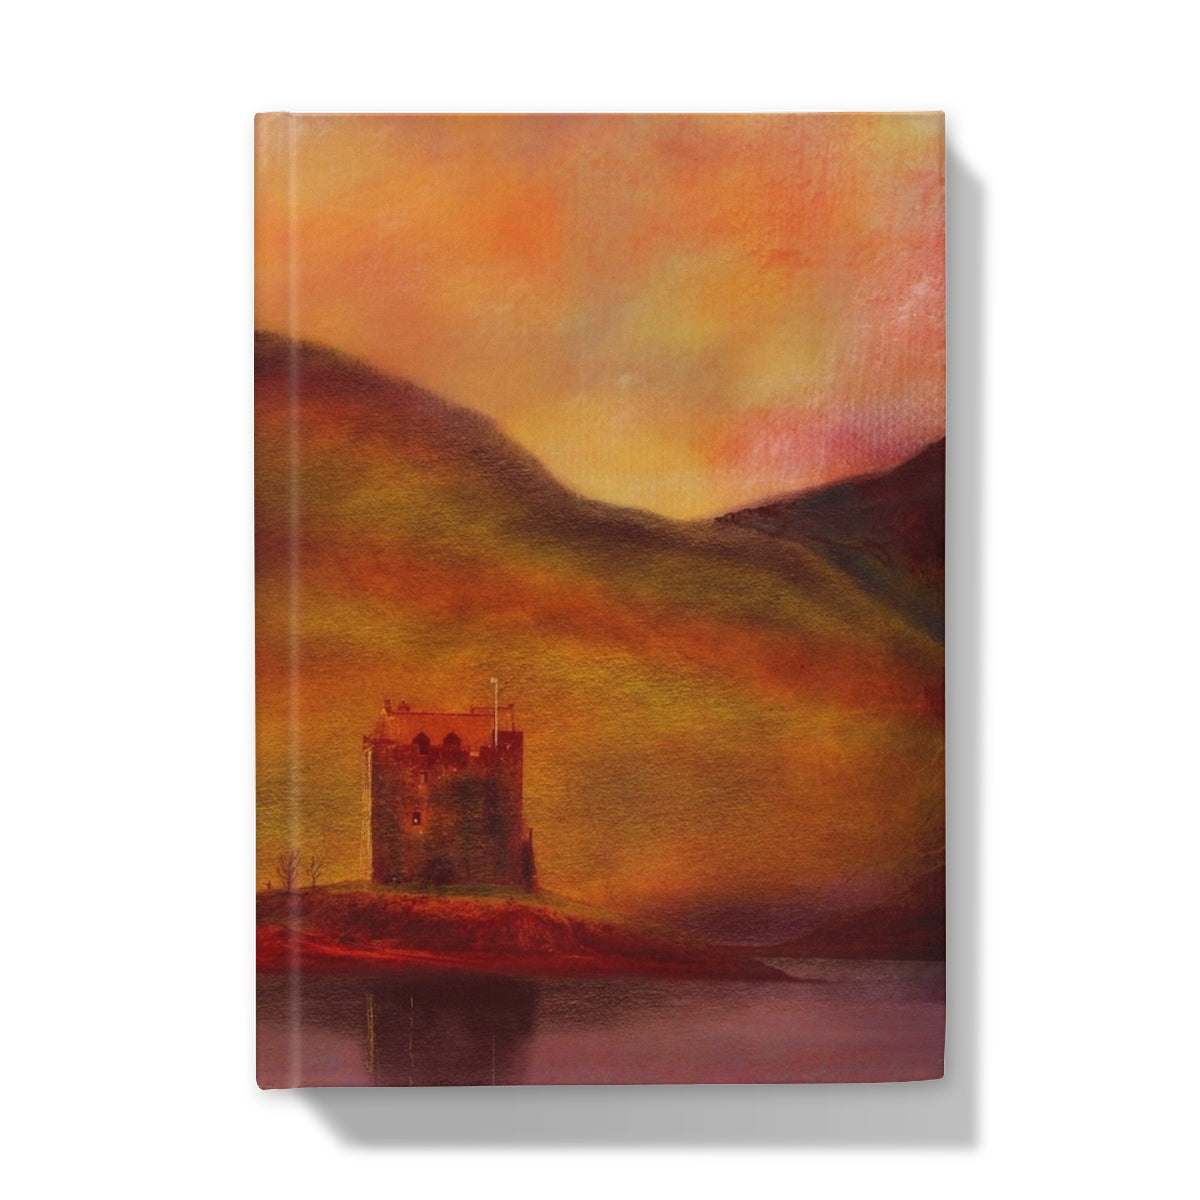 Castle Stalker Sunset Art Gifts Hardback Journal-Journals & Notebooks-Historic & Iconic Scotland Art Gallery-A5-Plain-Paintings, Prints, Homeware, Art Gifts From Scotland By Scottish Artist Kevin Hunter